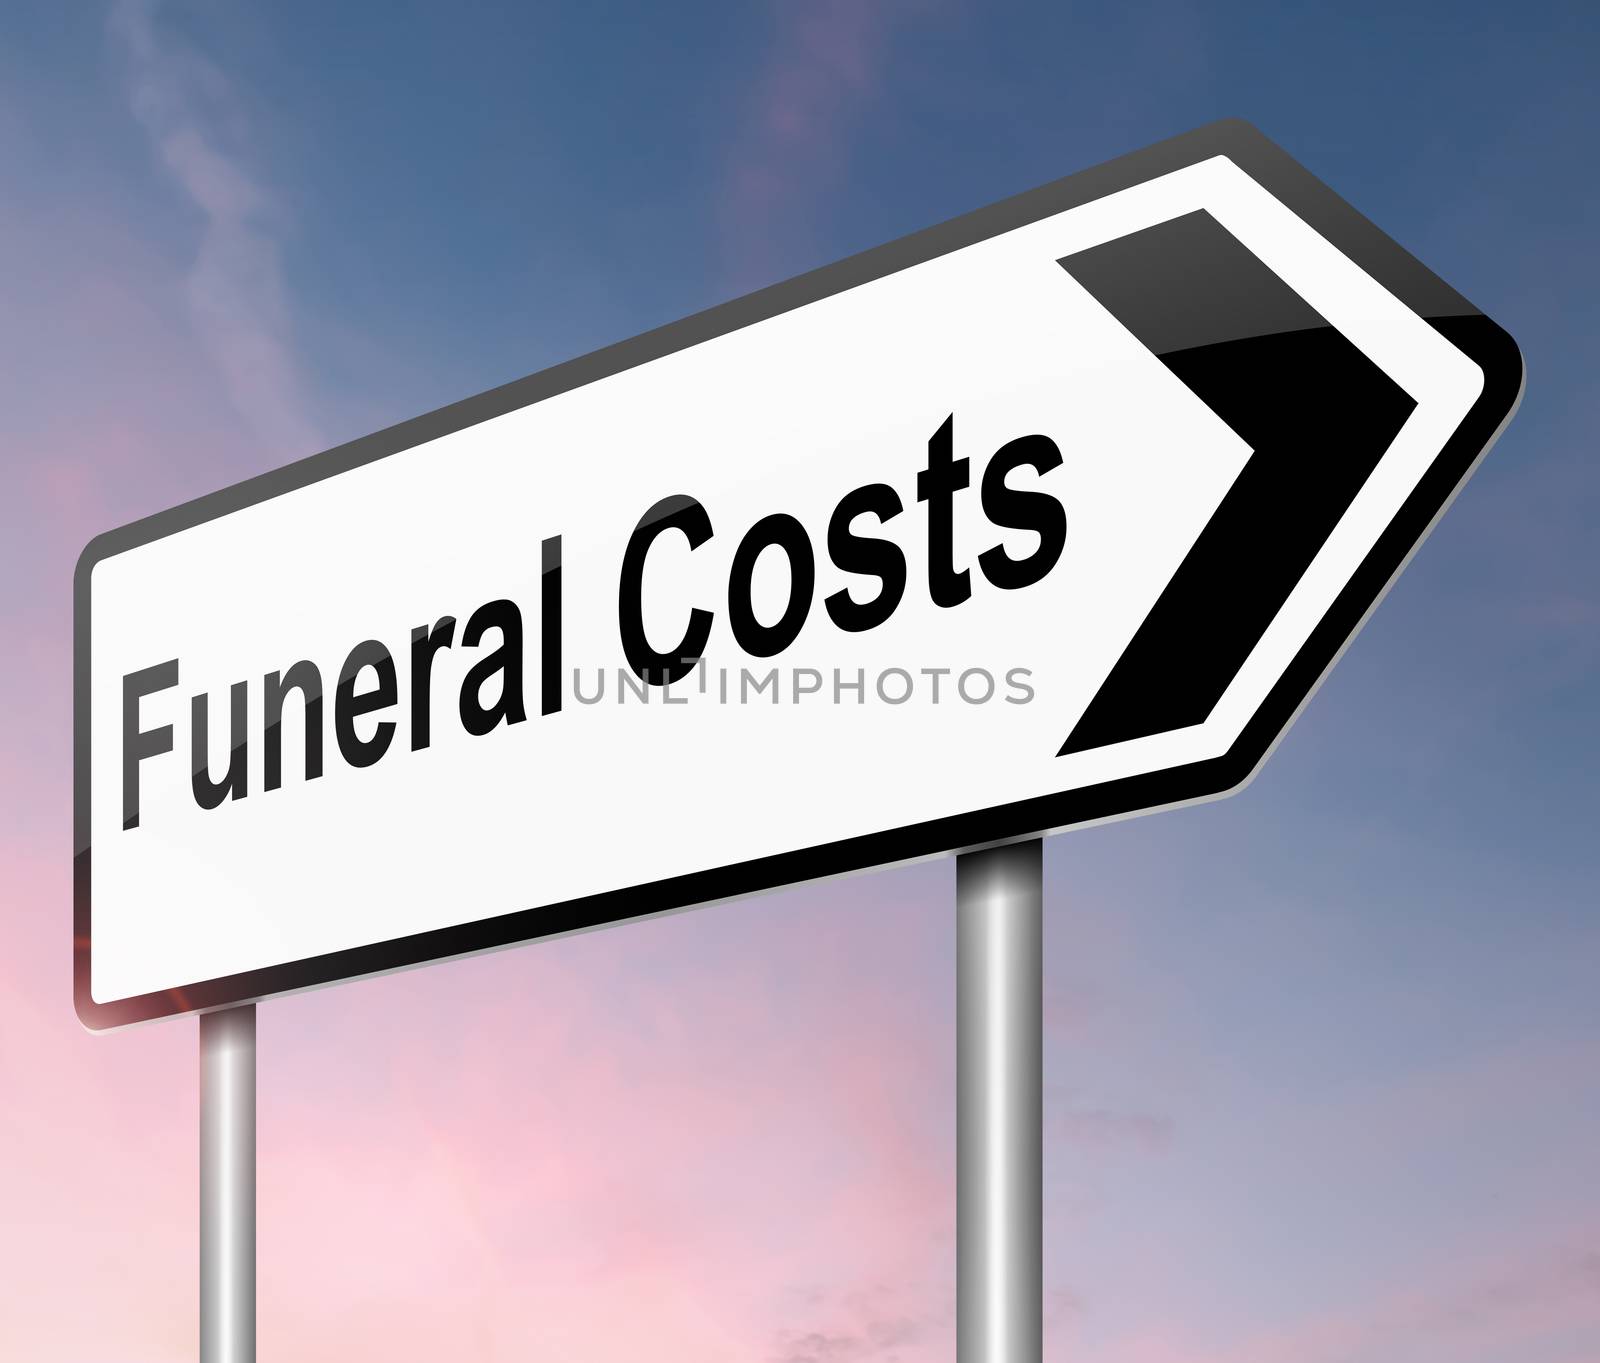 Funeral costs concept. by 72soul